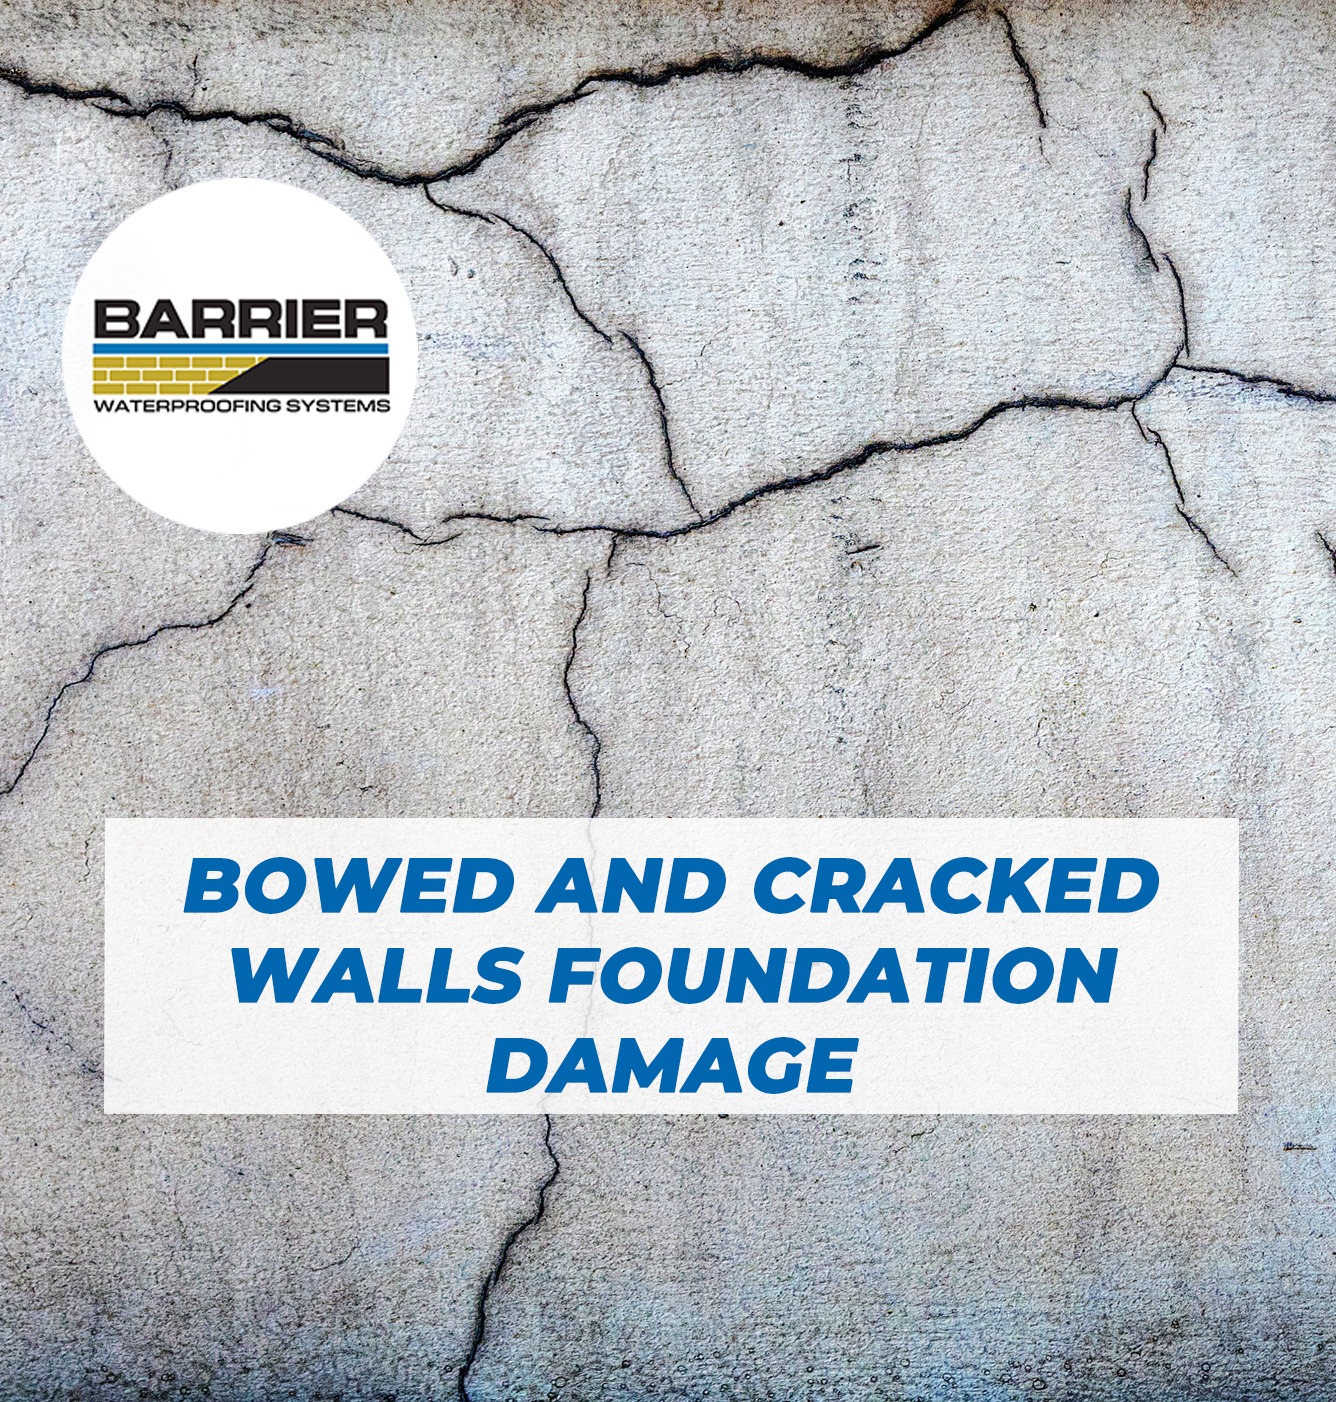 Cracked foundation walls below a home imagery for bowed and cracked foundation walls